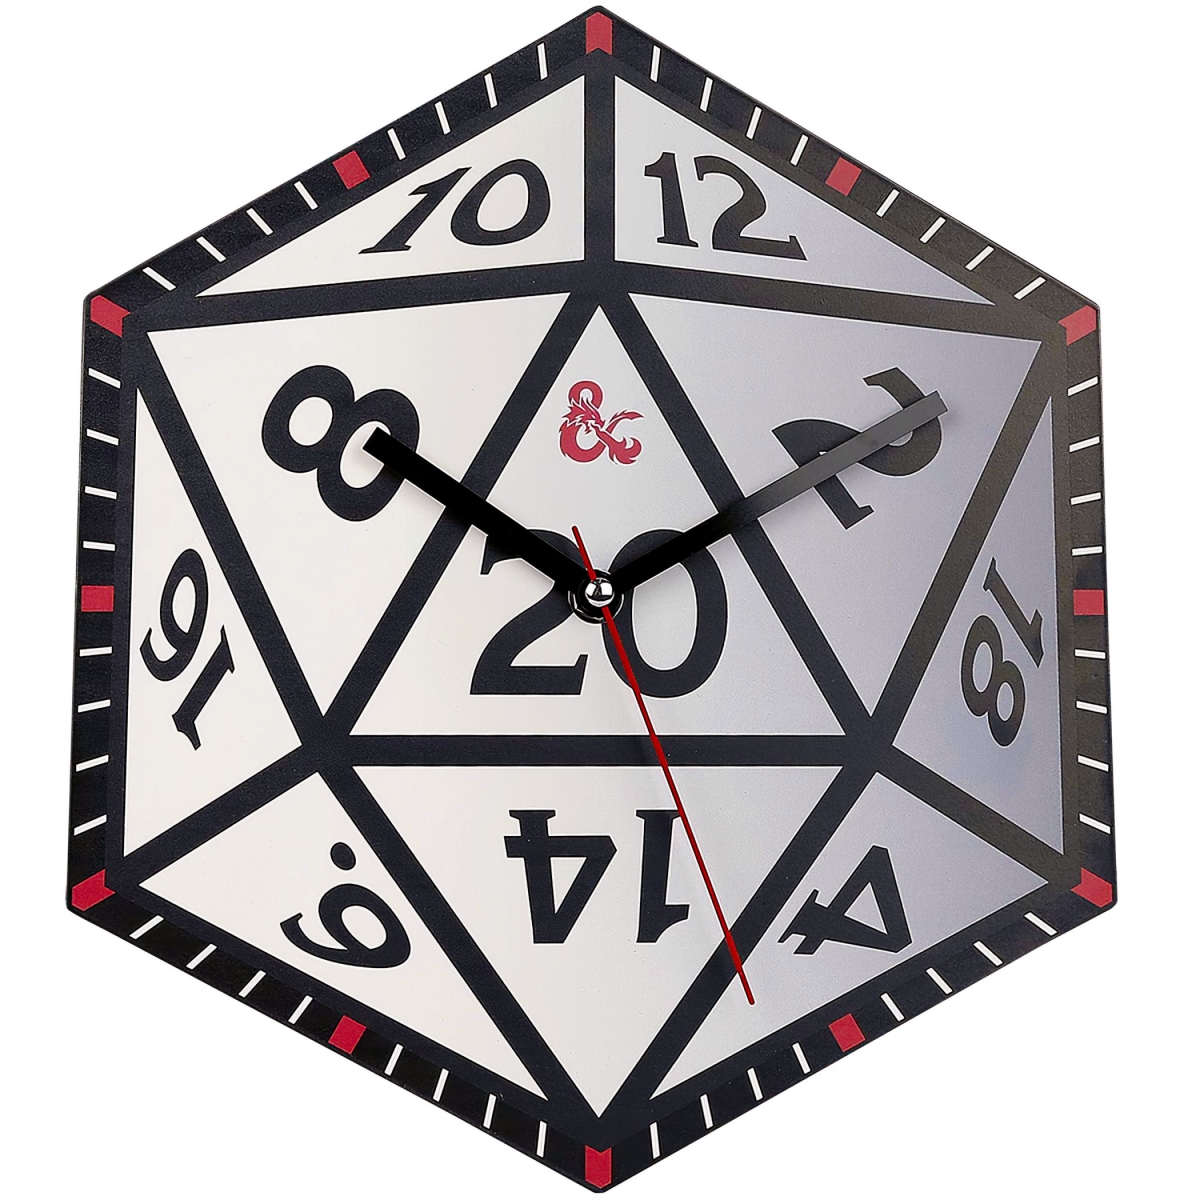 Picture of Dungeons & Dragons 863105 12 in. D20 Dice Metal Wall Clock